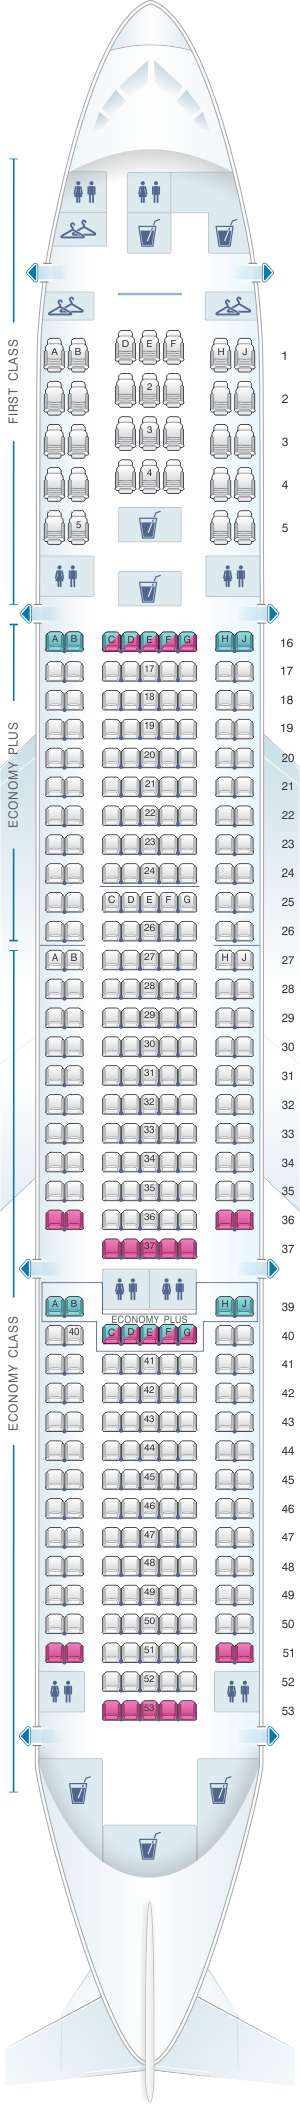 United Boeing Jet Seating